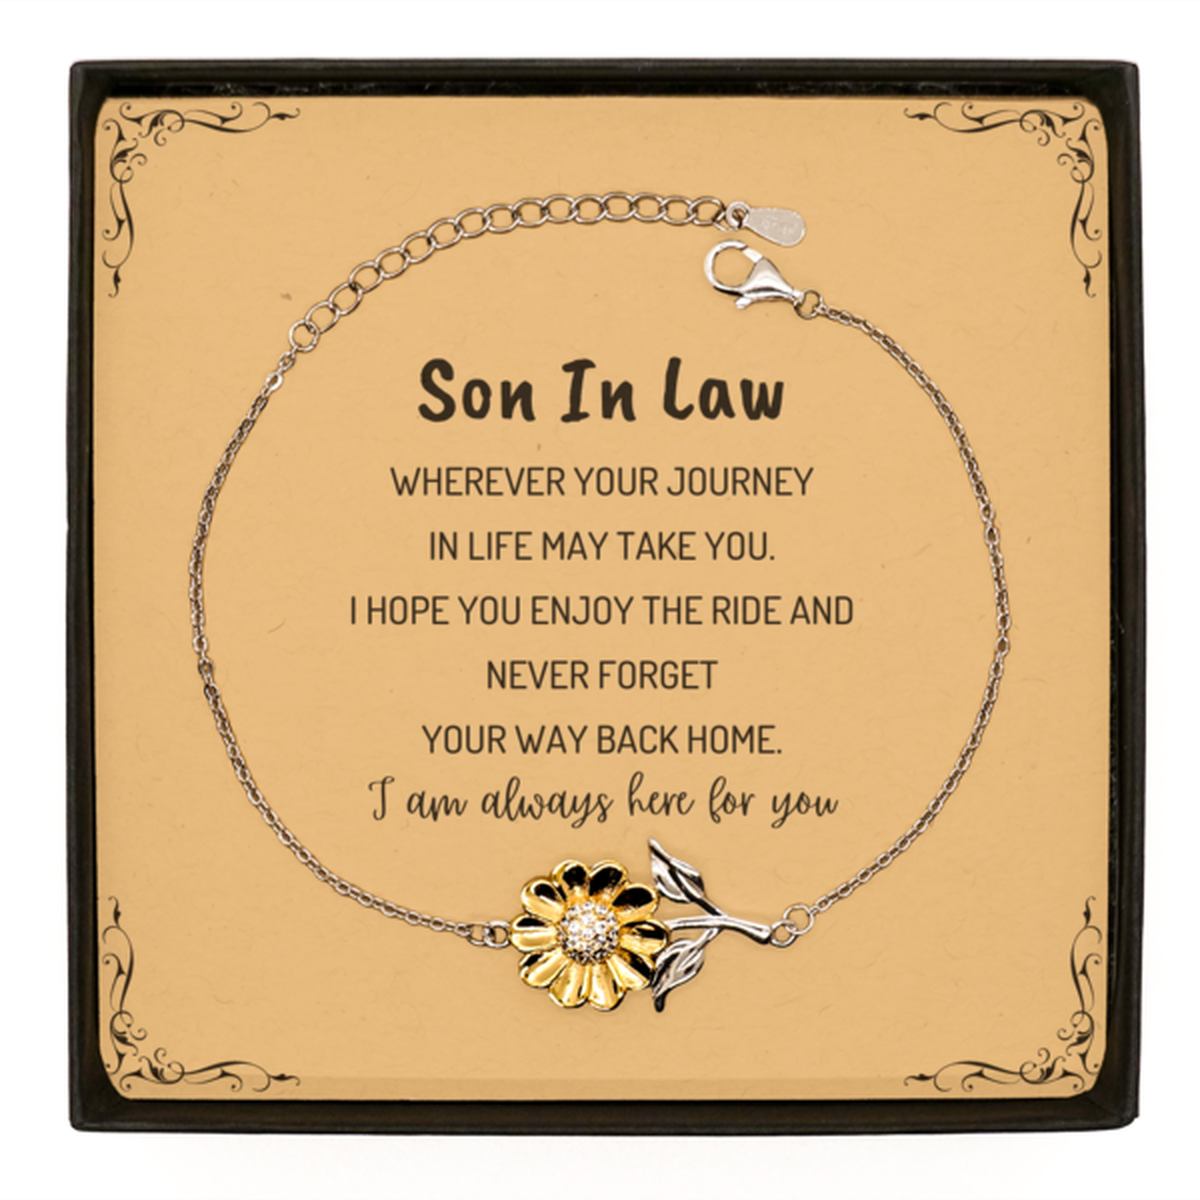 Son In Law wherever your journey in life may take you, I am always here for you Son In Law Sunflower Bracelet, Awesome Christmas Gifts For Son In Law Message Card, Son In Law Birthday Gifts for Men Women Family Loved One